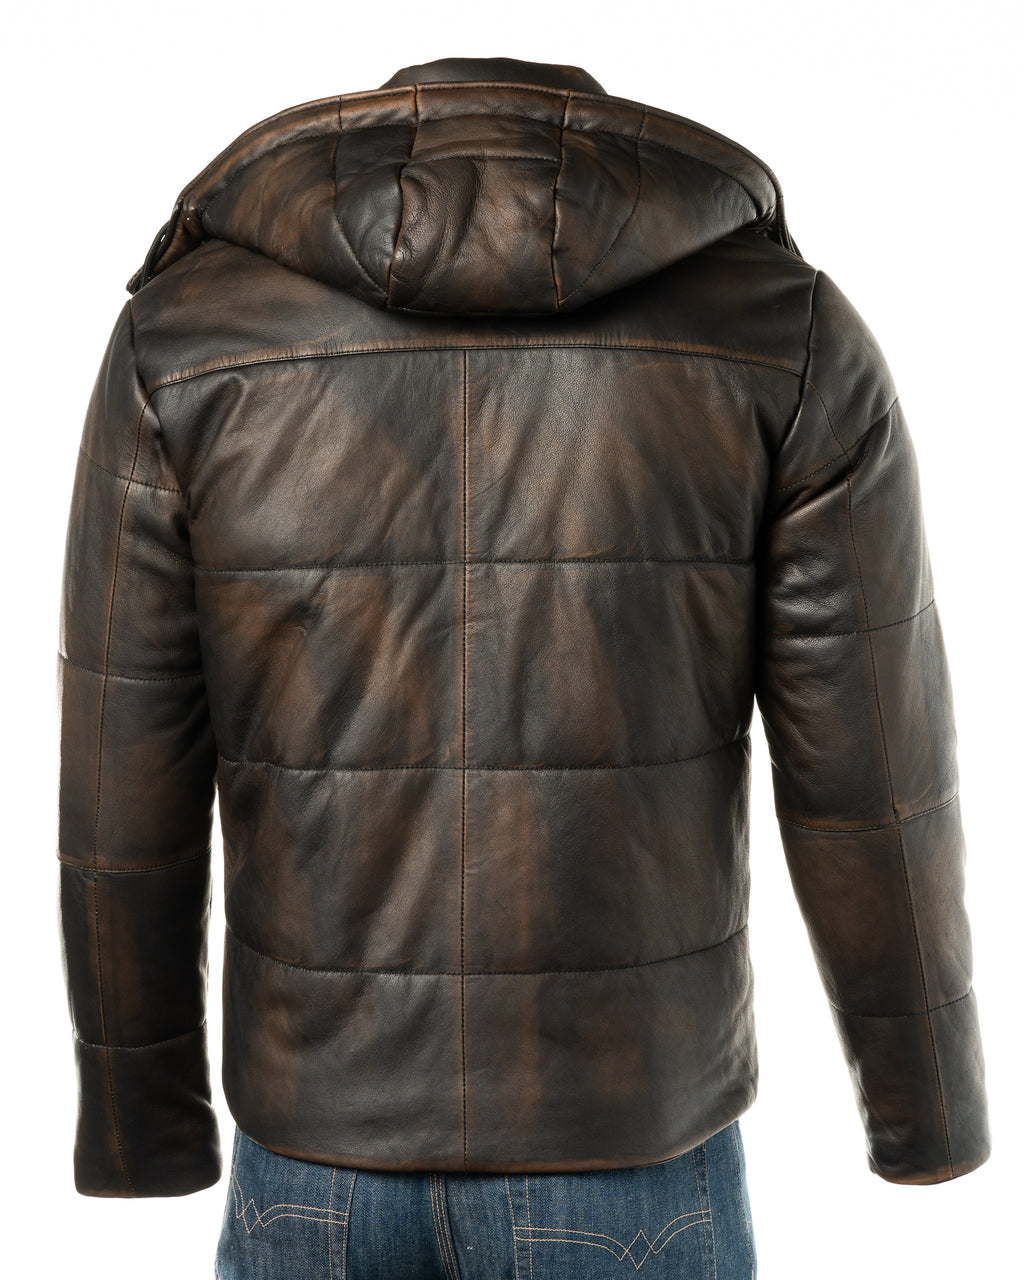 Men's Antique Black Leather Puffer Jacket With Detachable Hood: Dino